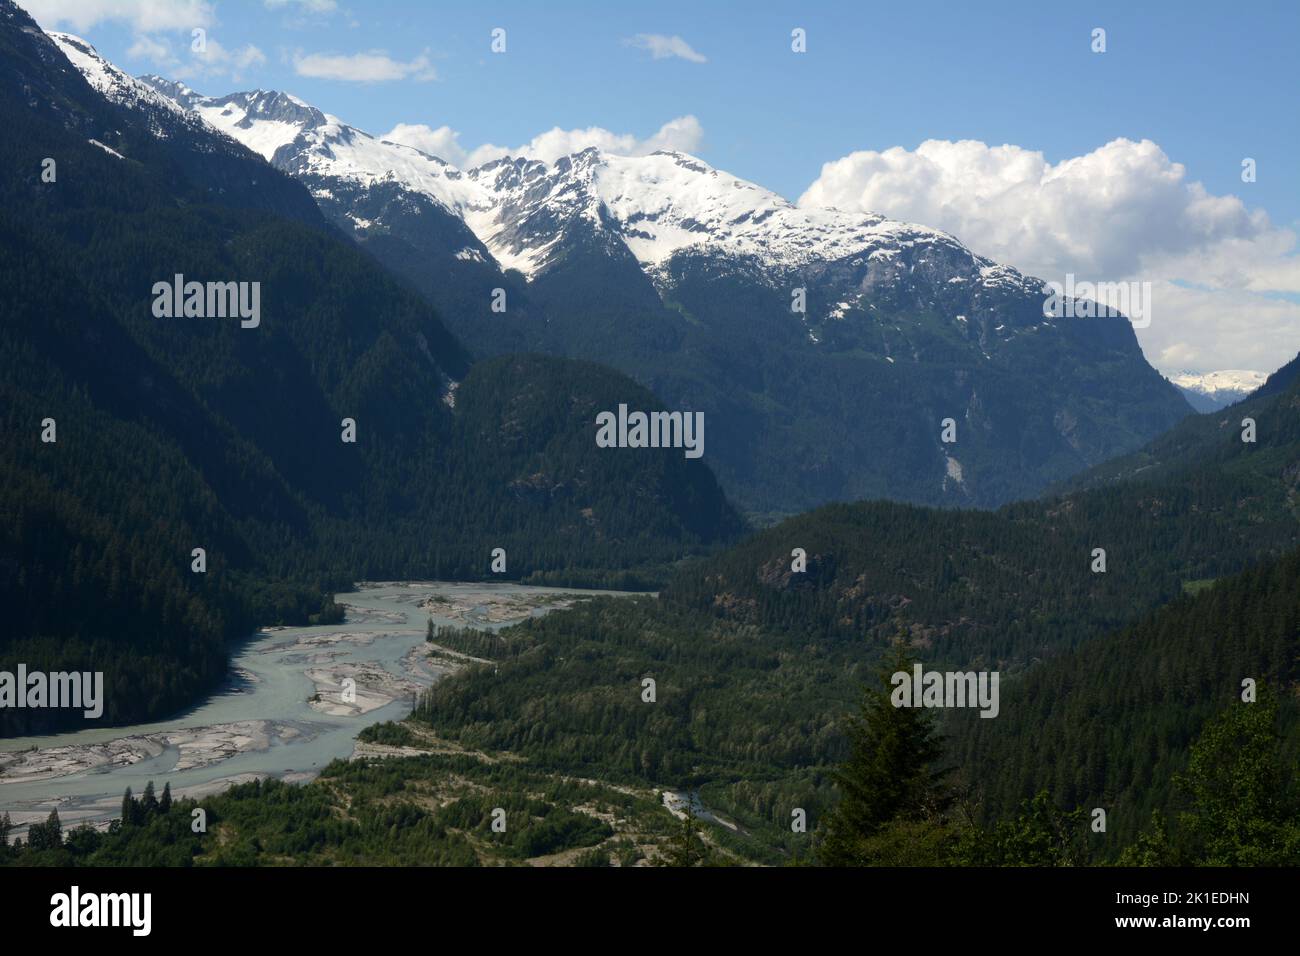 The Upper Squamish River and Valley running through the Tantalus Range of the Coast Mountains of British Columbia, Canada. Stock Photo